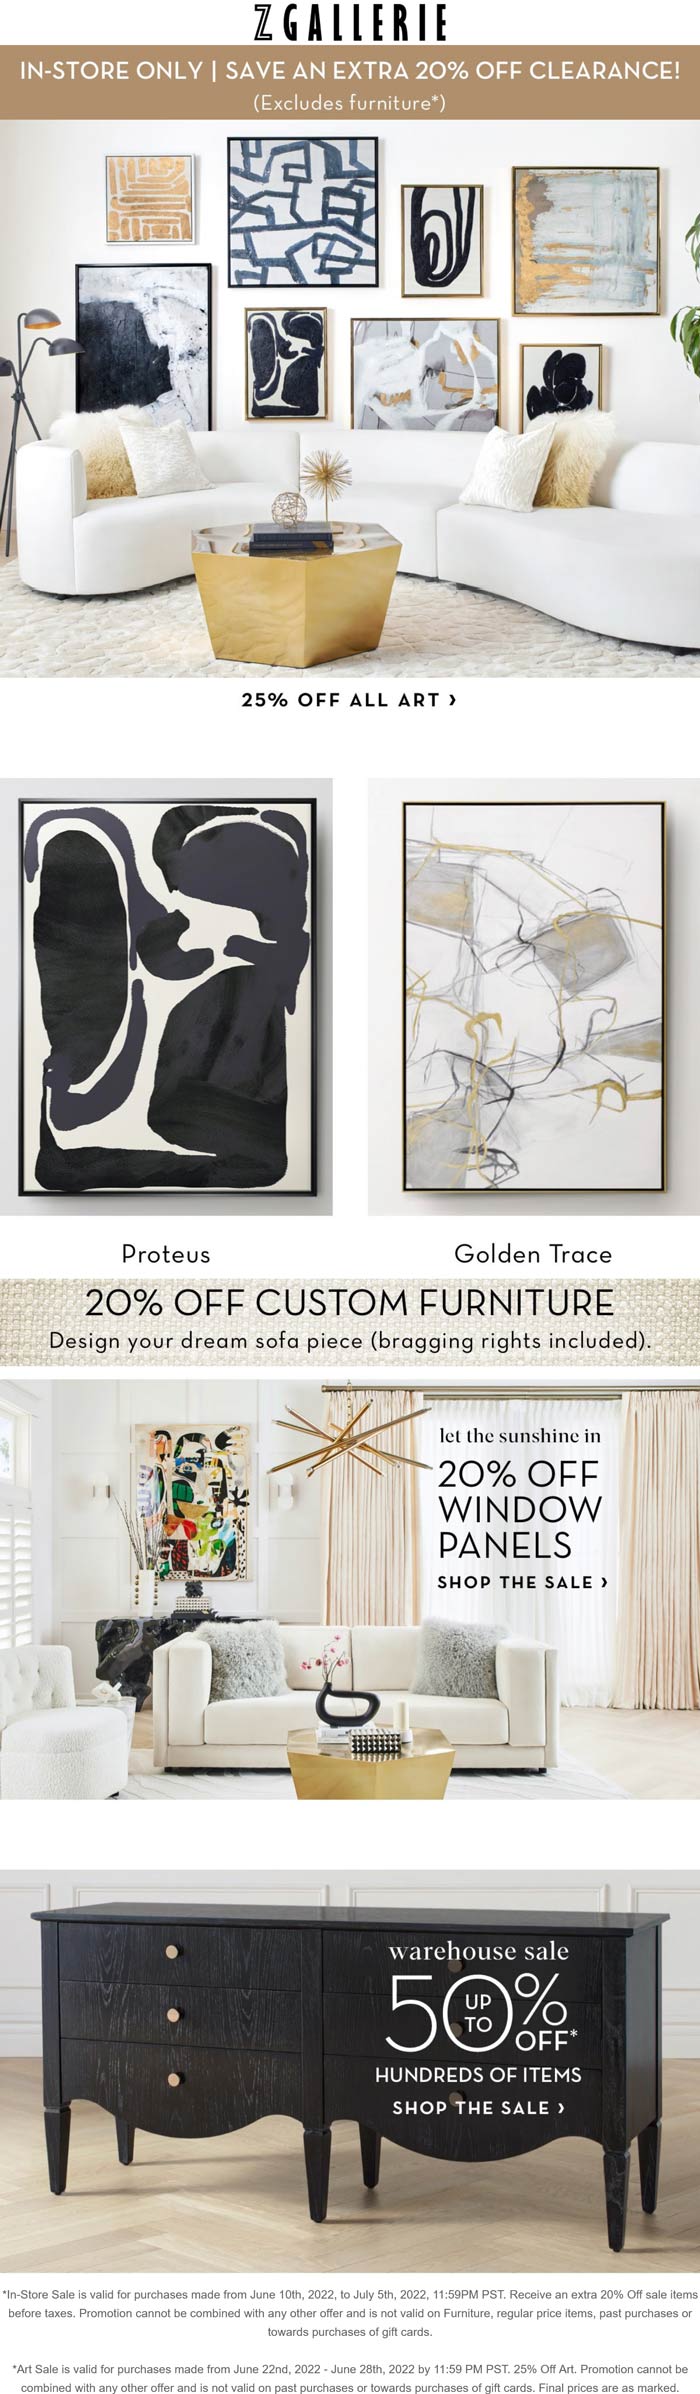 Z Gallerie stores Coupon  Extra 20% off sale items & more at Z Gallerie #zgallerie 